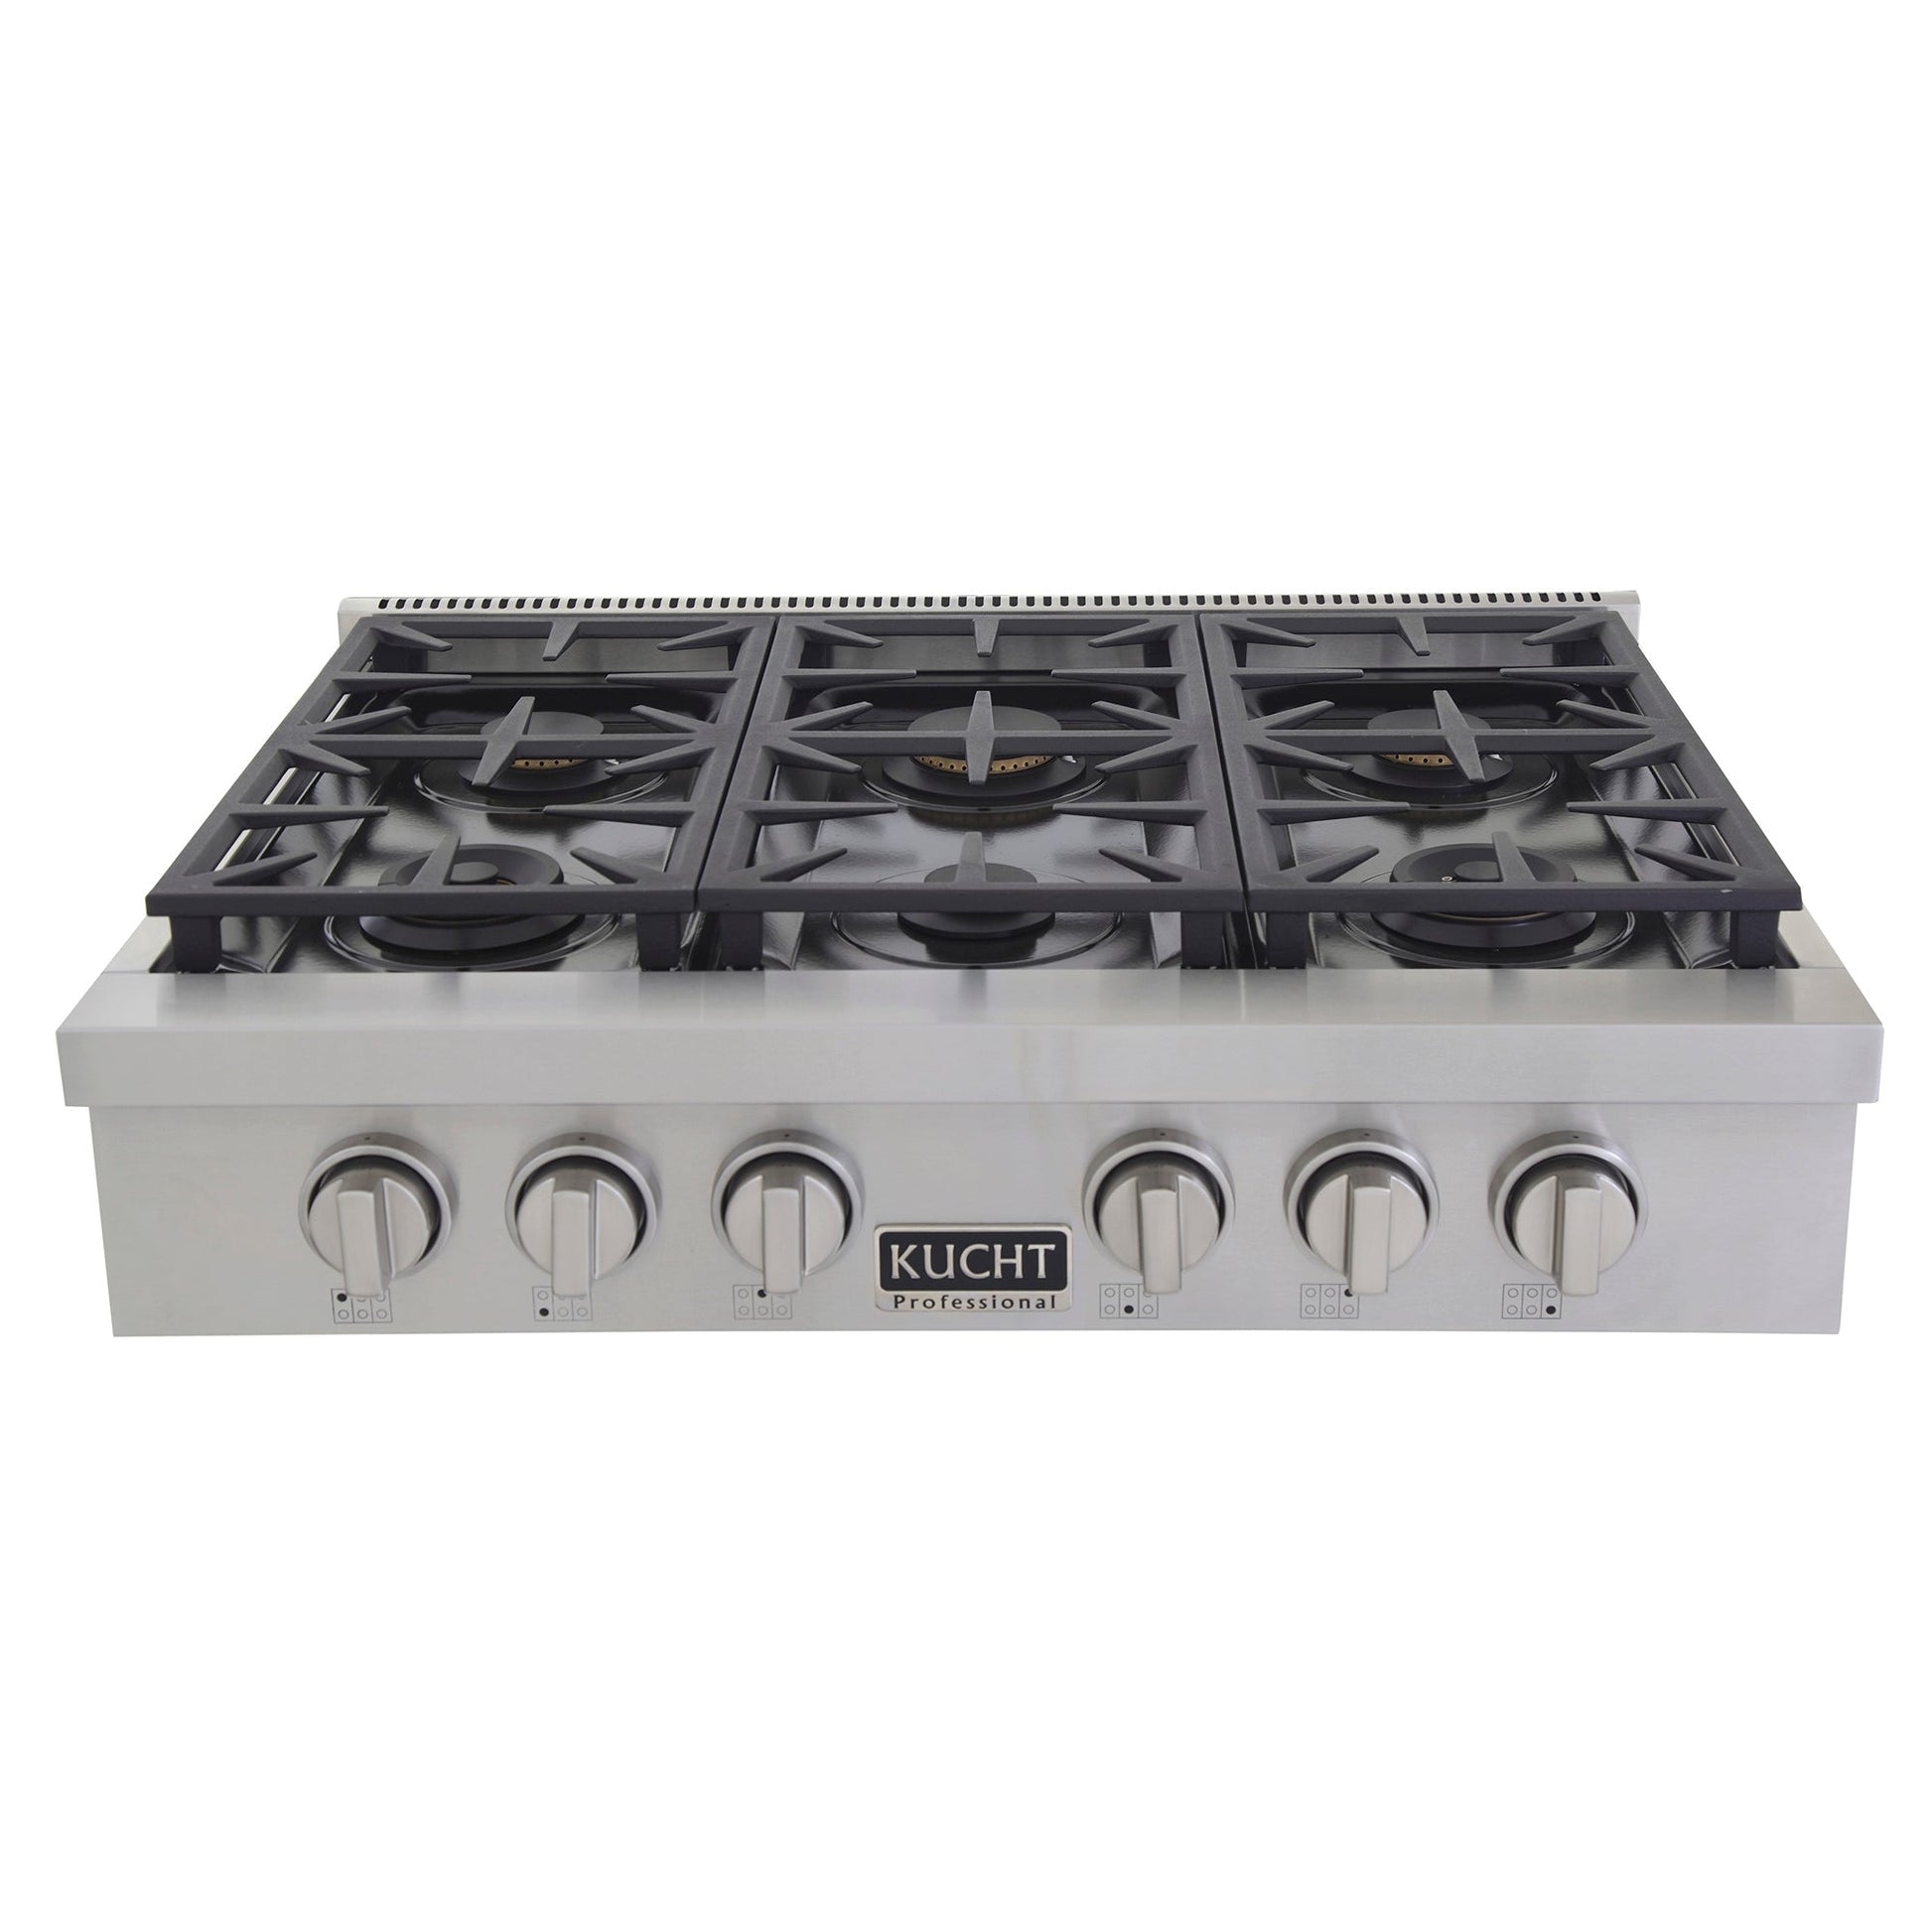 Kucht KFX Series 36" Natural Gas Range-Top With 6 Burners and Classic Silver Knobs